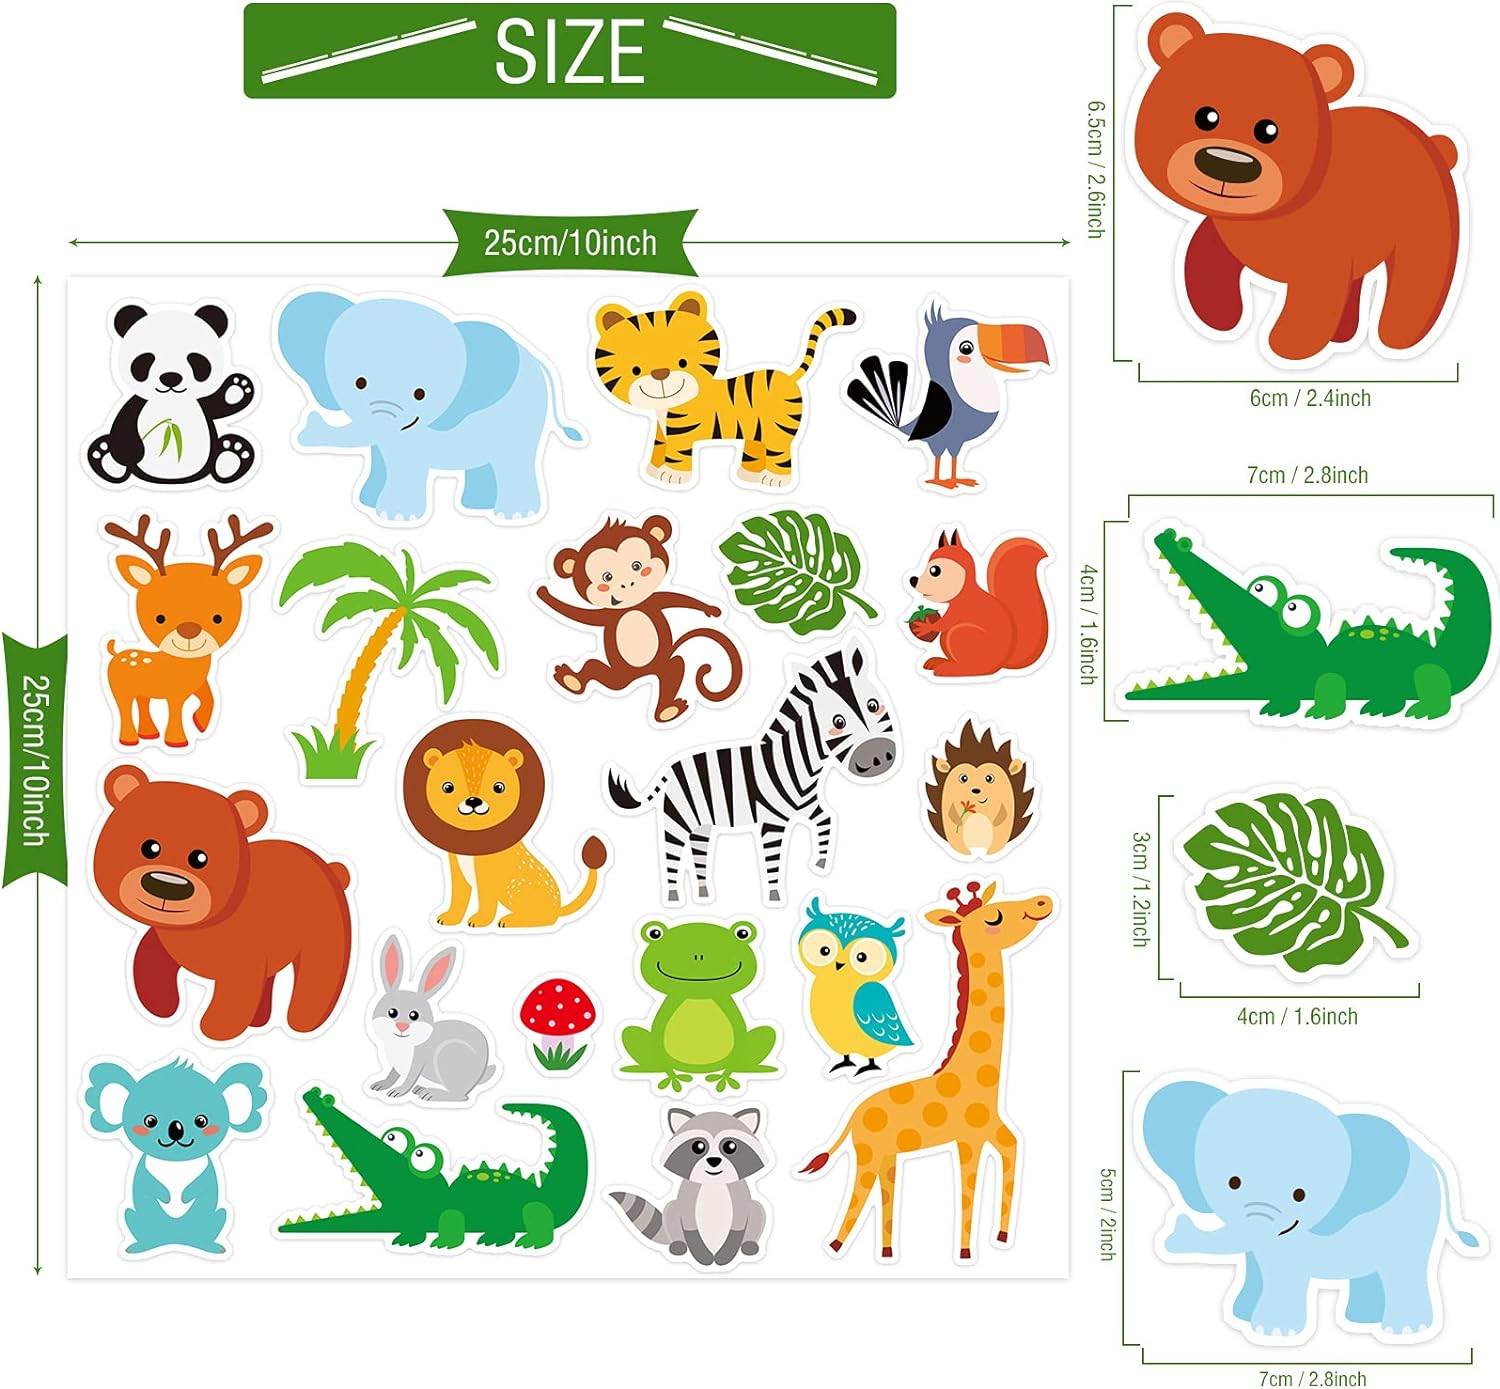 Animal Window Clings, Kids Removable And Reusable Gel Stickers 